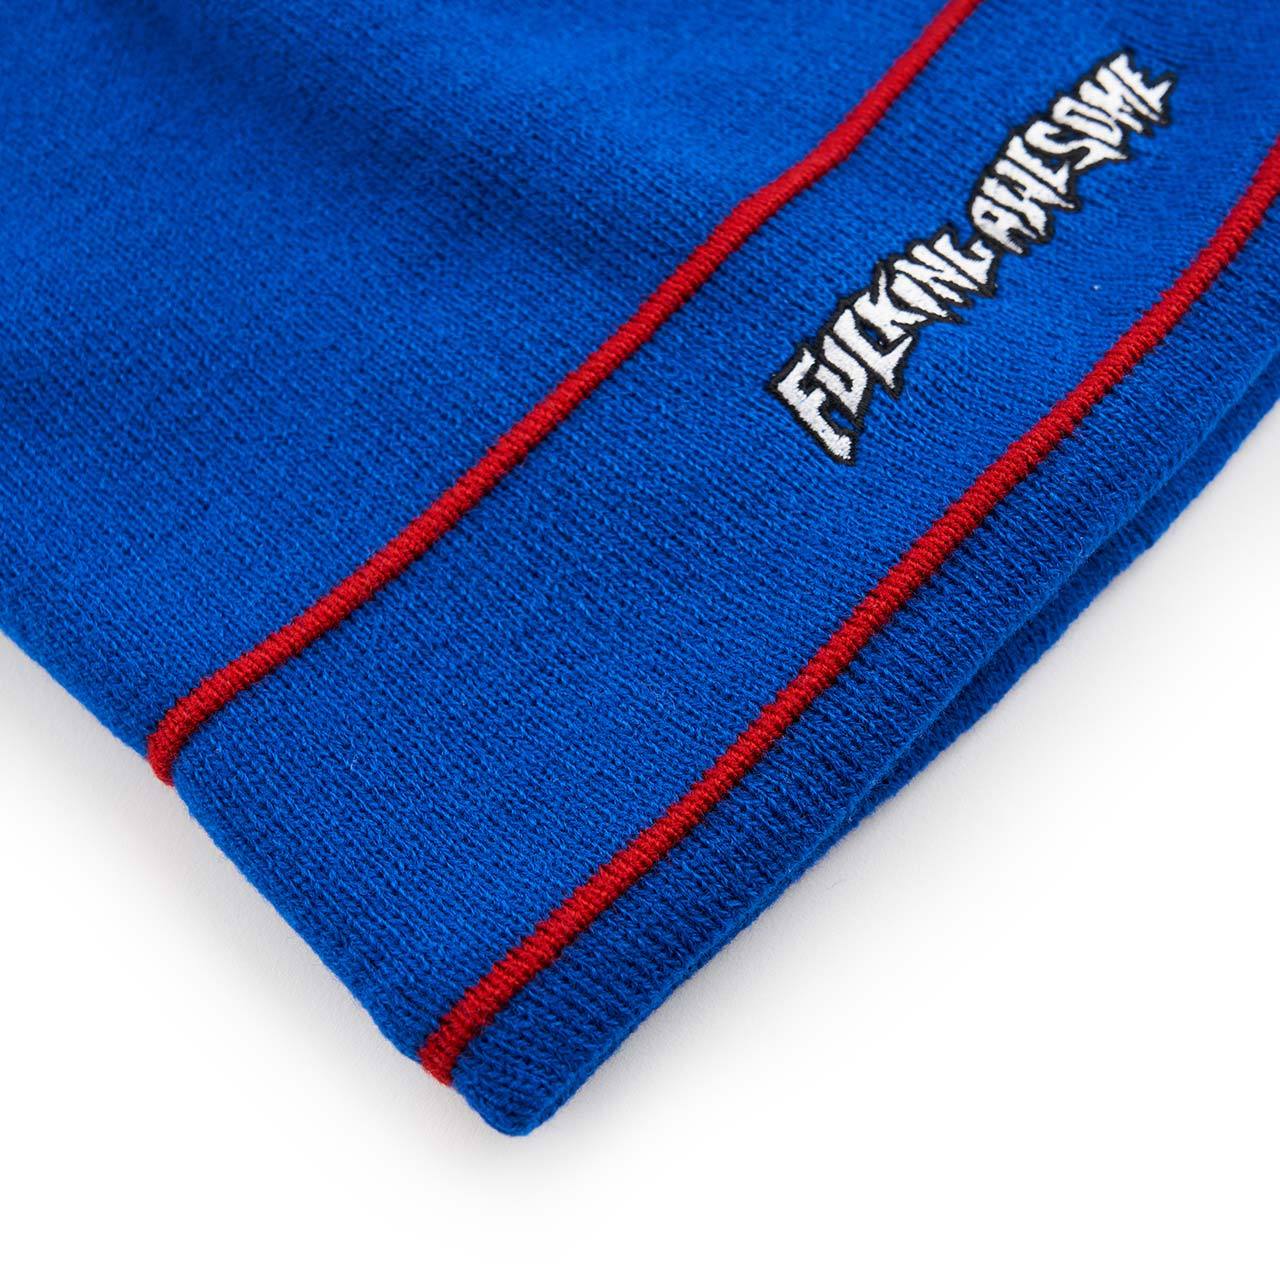 fucking awesome fucking awesome little stamp stripe beanie (blue/red) P709211